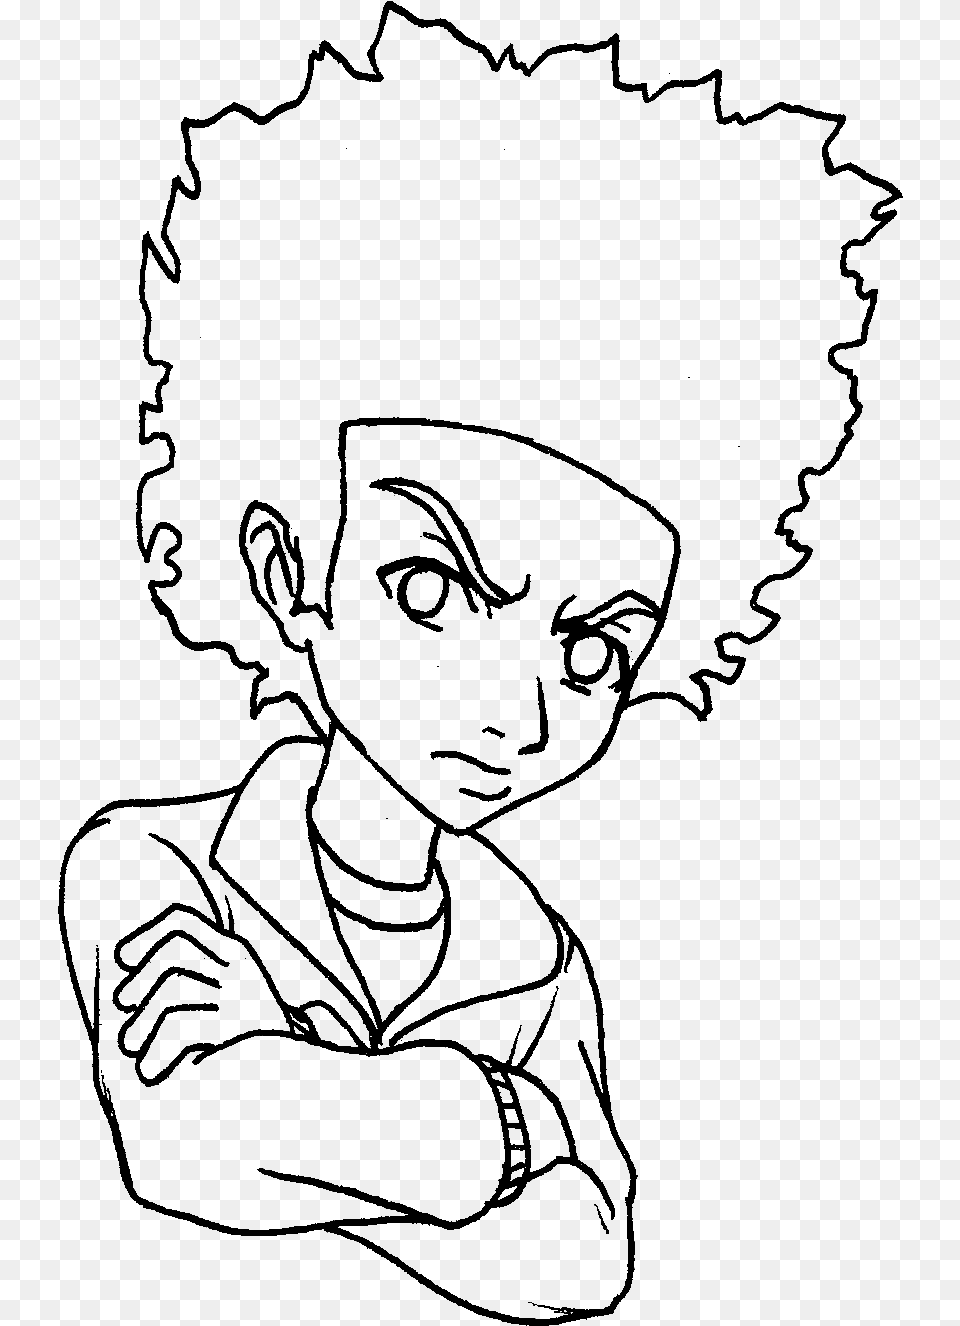 Huey At Getdrawings Com For Personal Boondocks Black And White, Gray Png